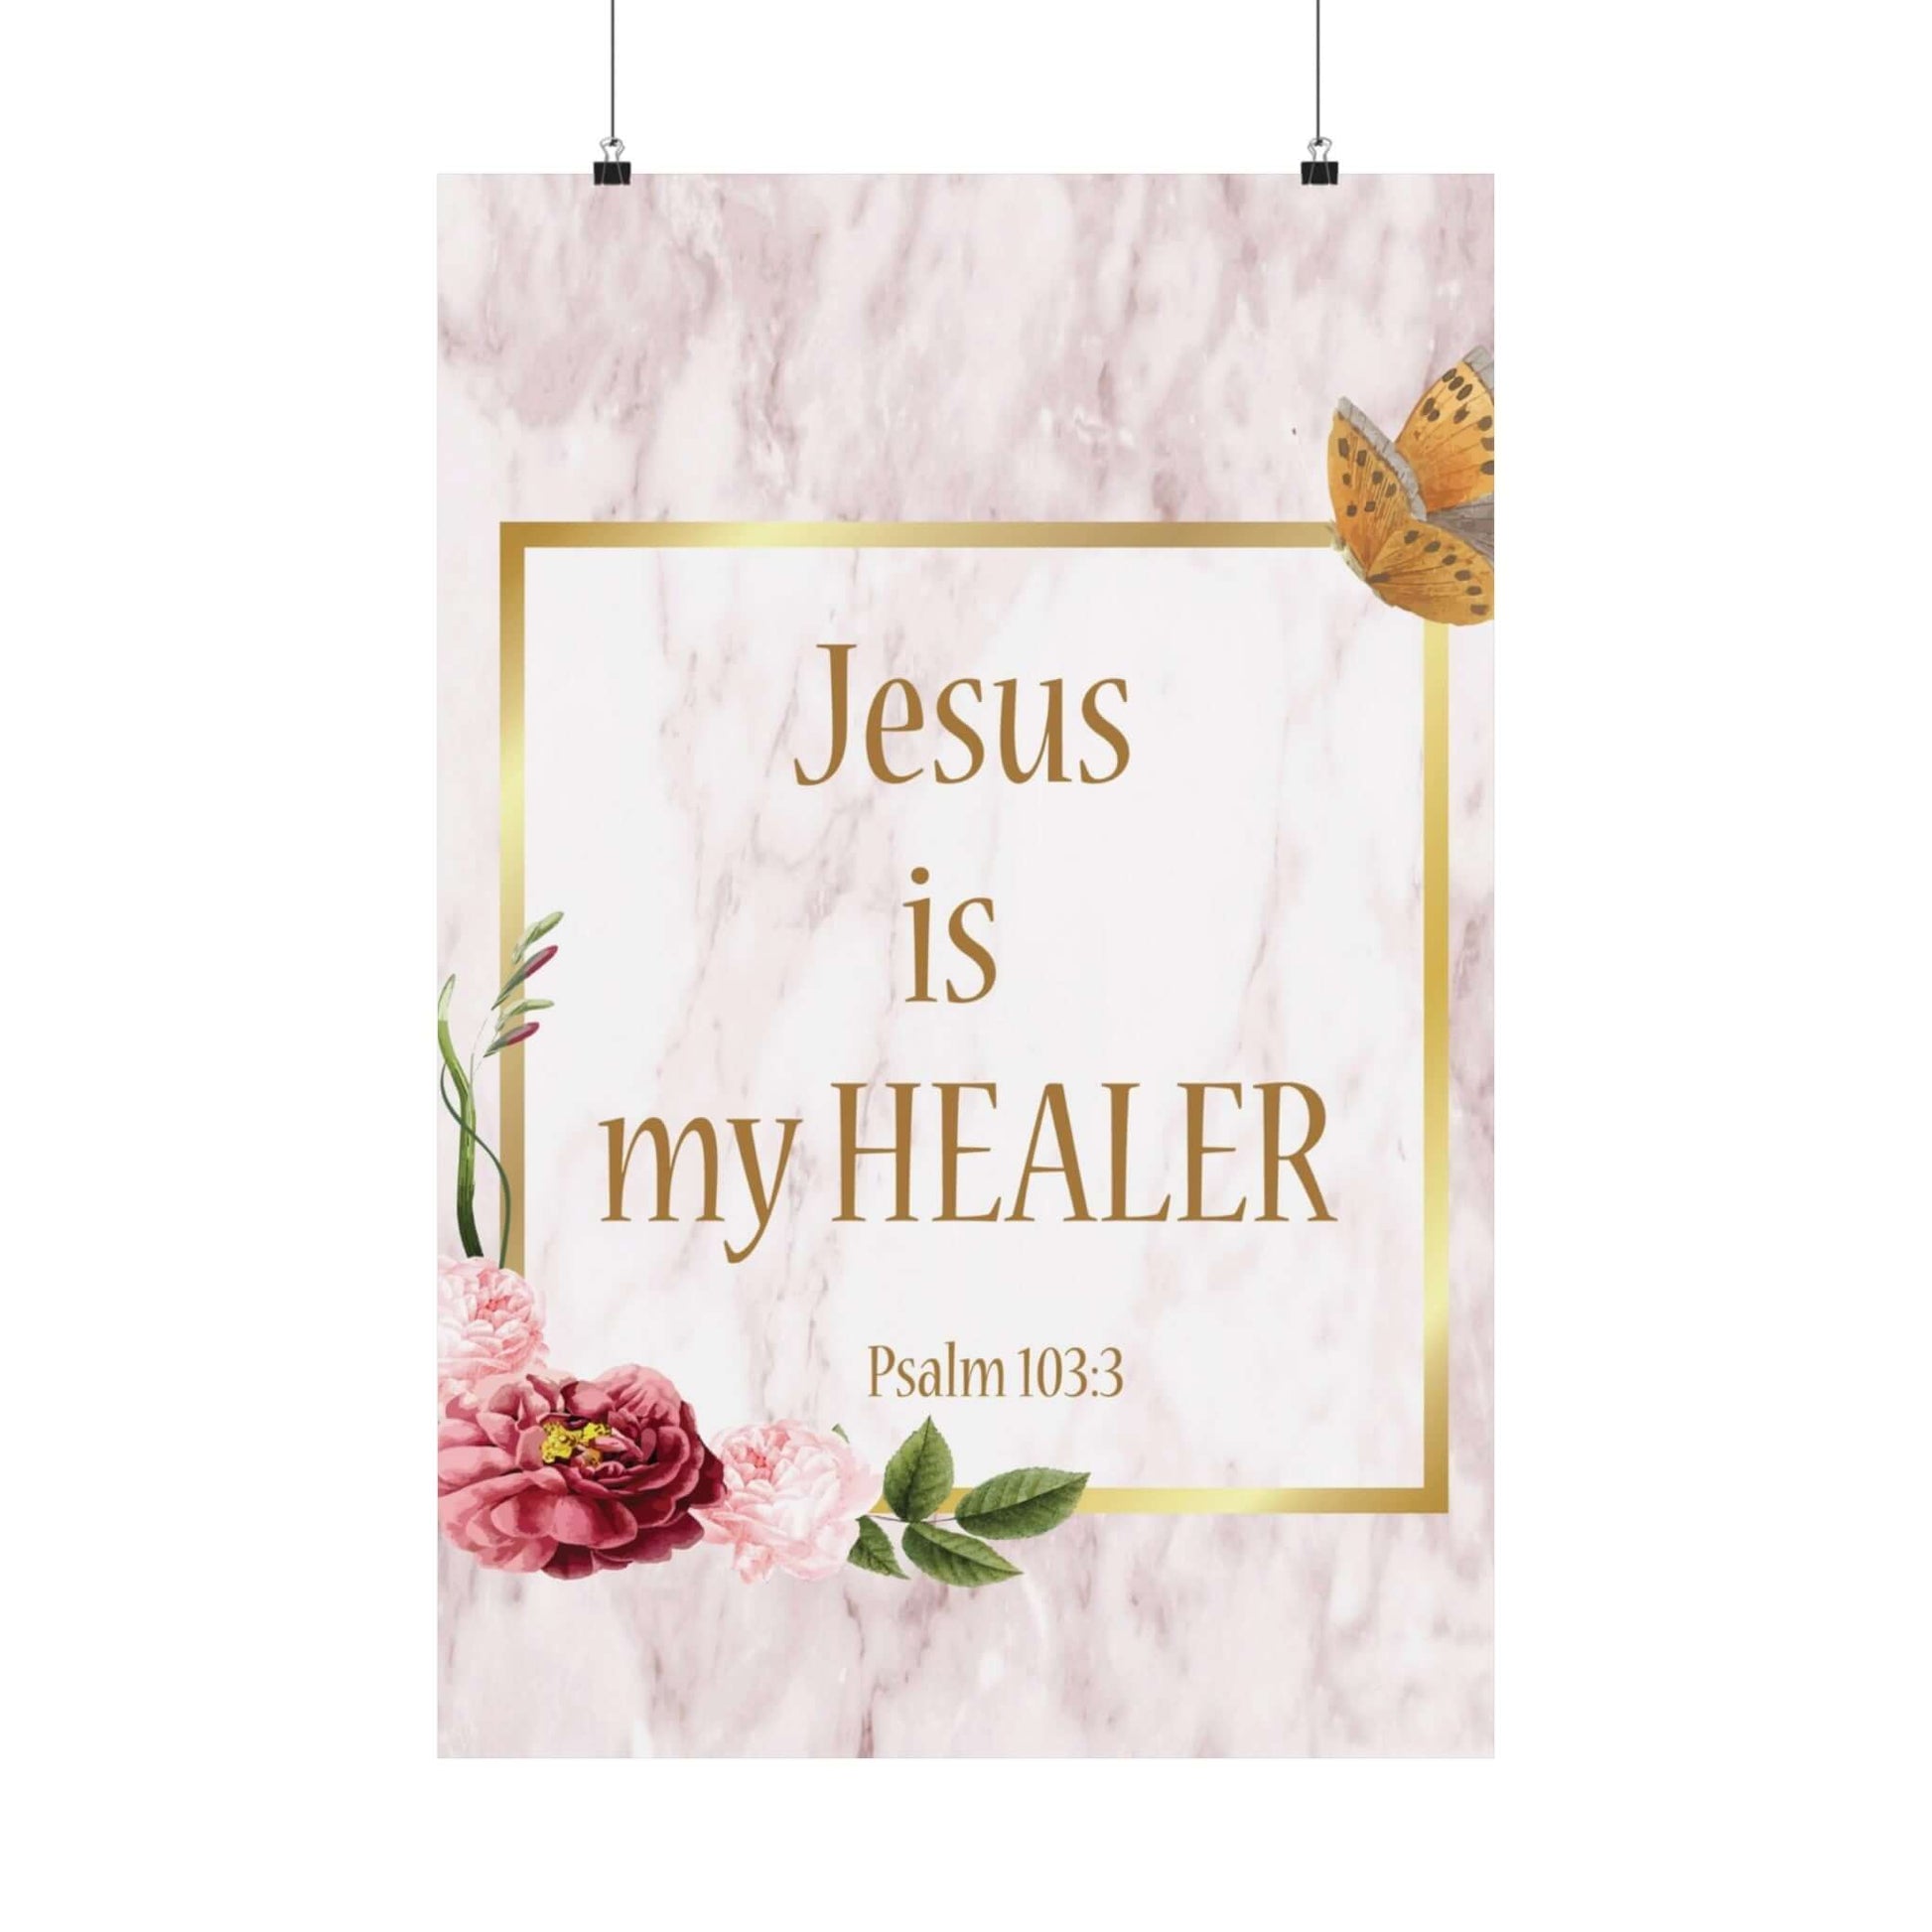 Colorful Wall Decor Poster - Premium Matte Vertical with Psalm 103:3 | Assembled in the USA,Assembled in USA,Back to School,Home & Living,Indoor,Made in the USA,Made in USA,Matte,Paper,Posters,Valentine's Day promotion